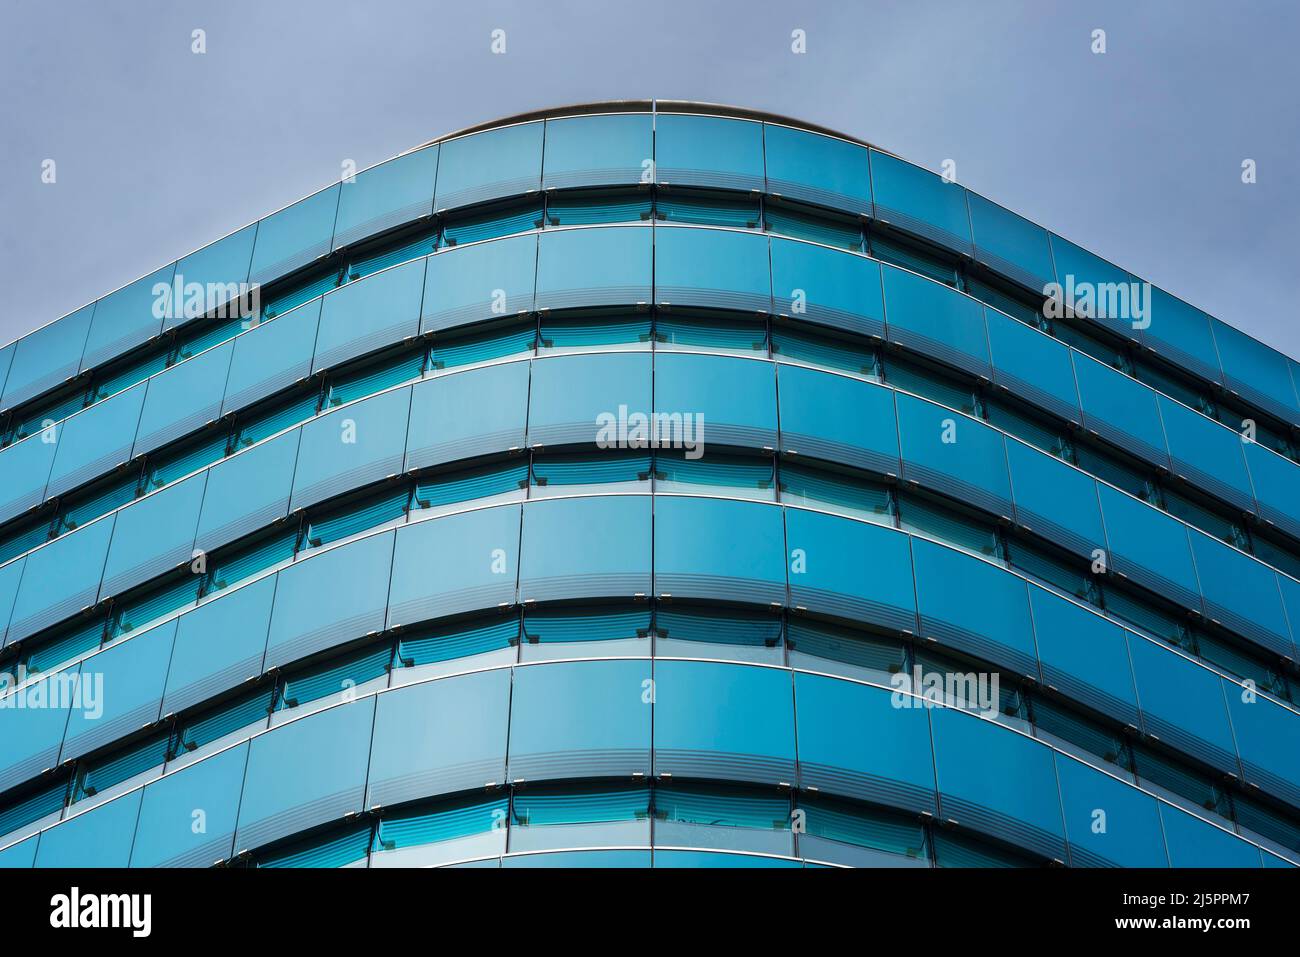 Blue glass clad tower block in a modern business development. Central business district. City of London. Stock Photo